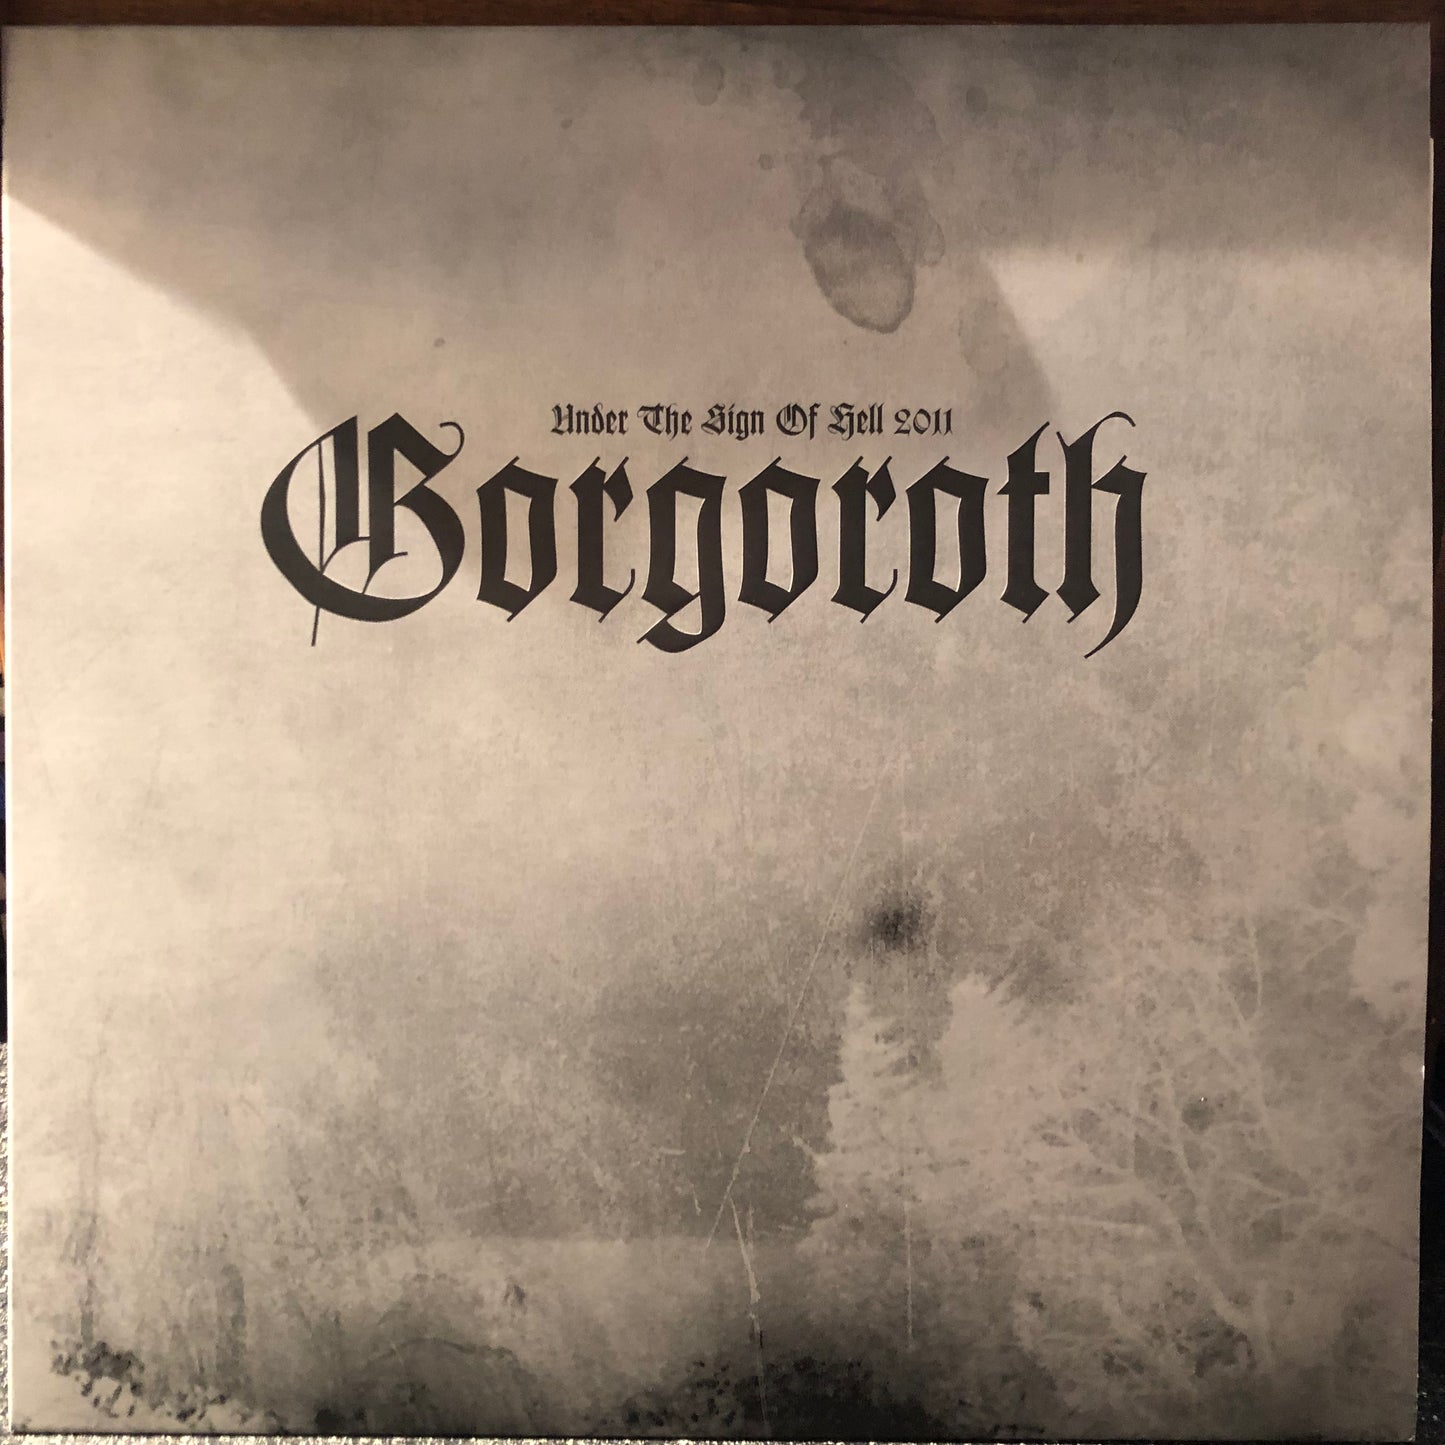 Gorgoroth - Under The Sign Of Hell 2011 (Used LP)